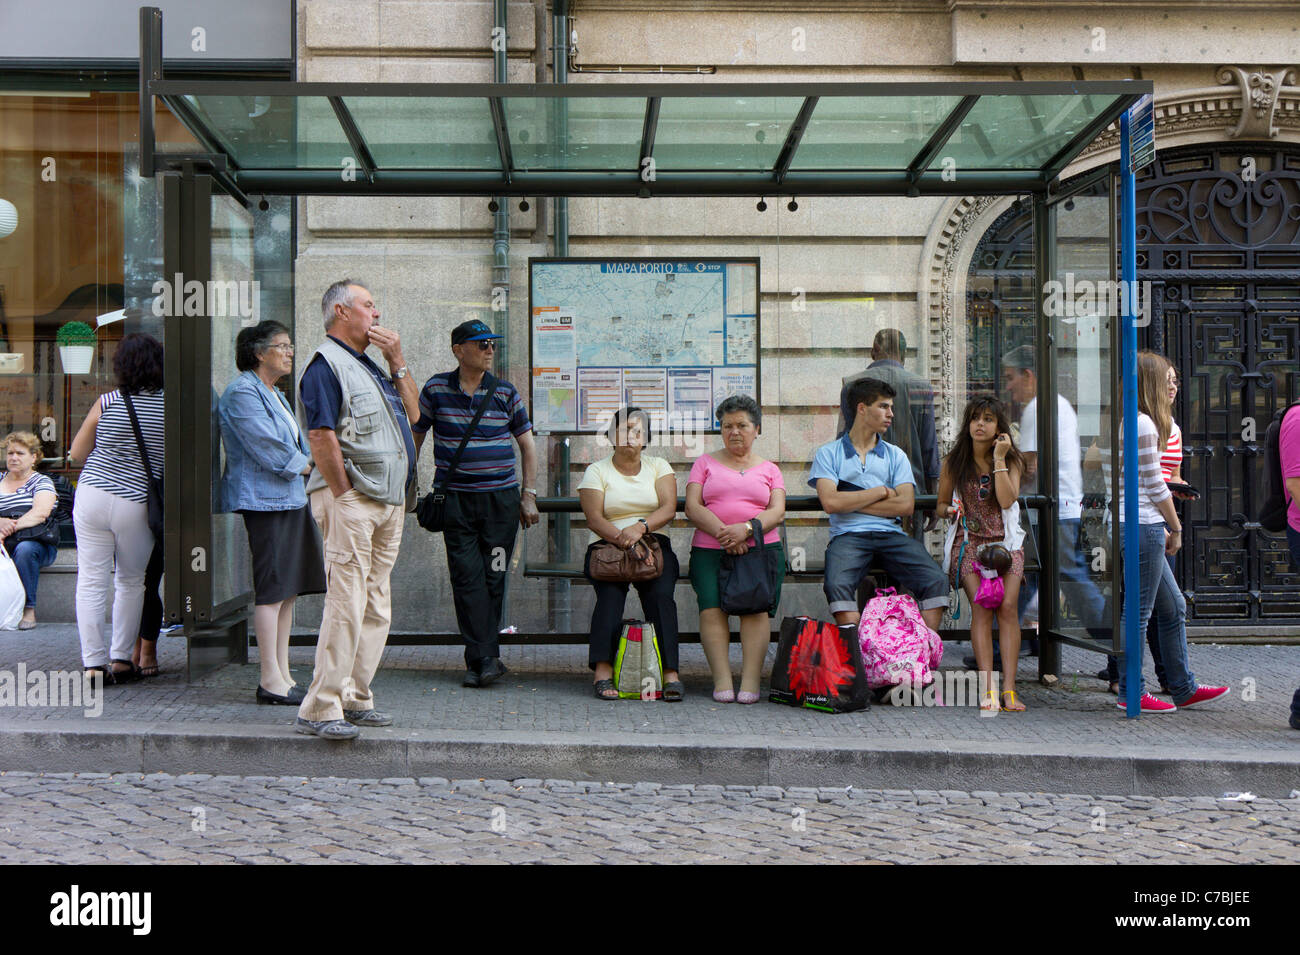 People waiting for bus at a bus stop, Porto, Portugal, Europe Stock Photo